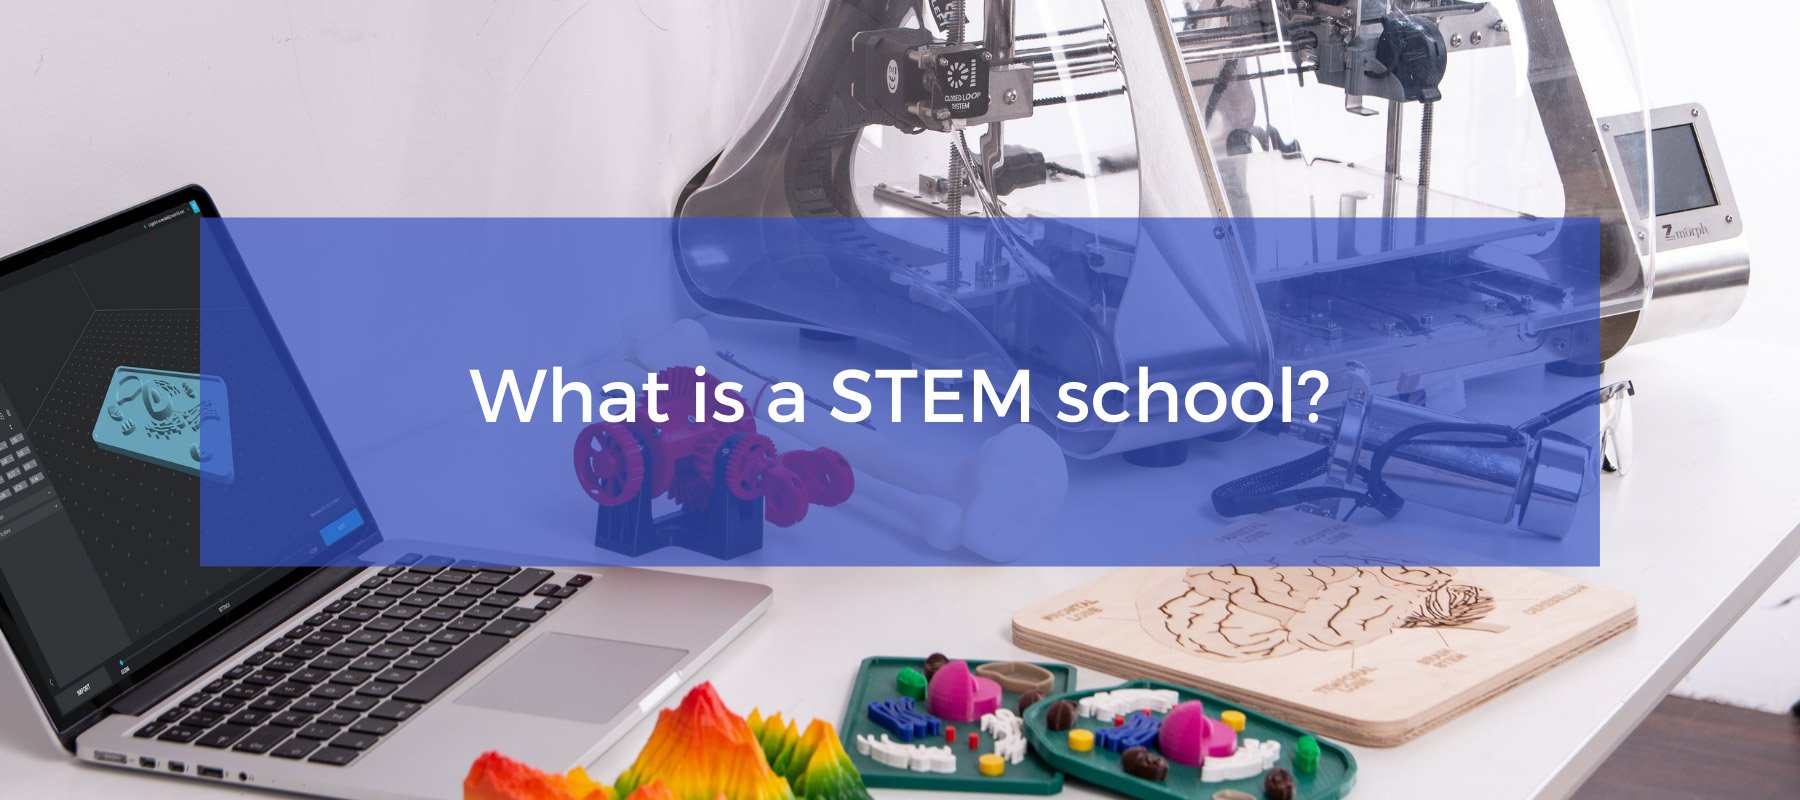 What is a STEM school?